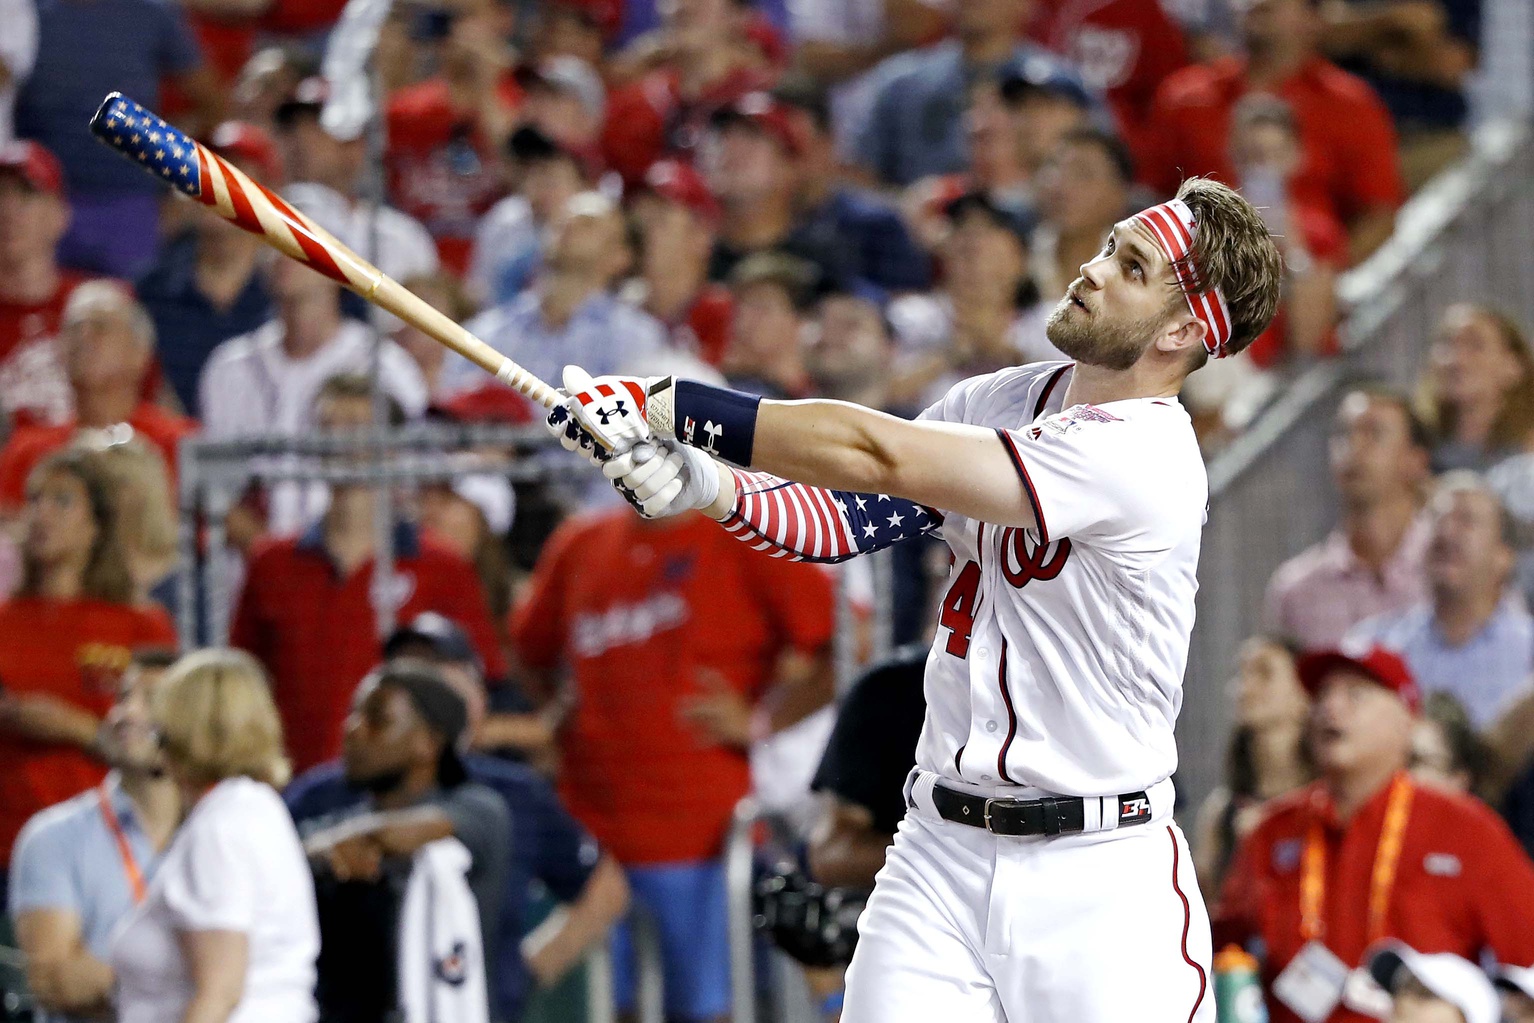 Report: Phillies’ Bryce Harper Offer is in the $270-300 Million Range